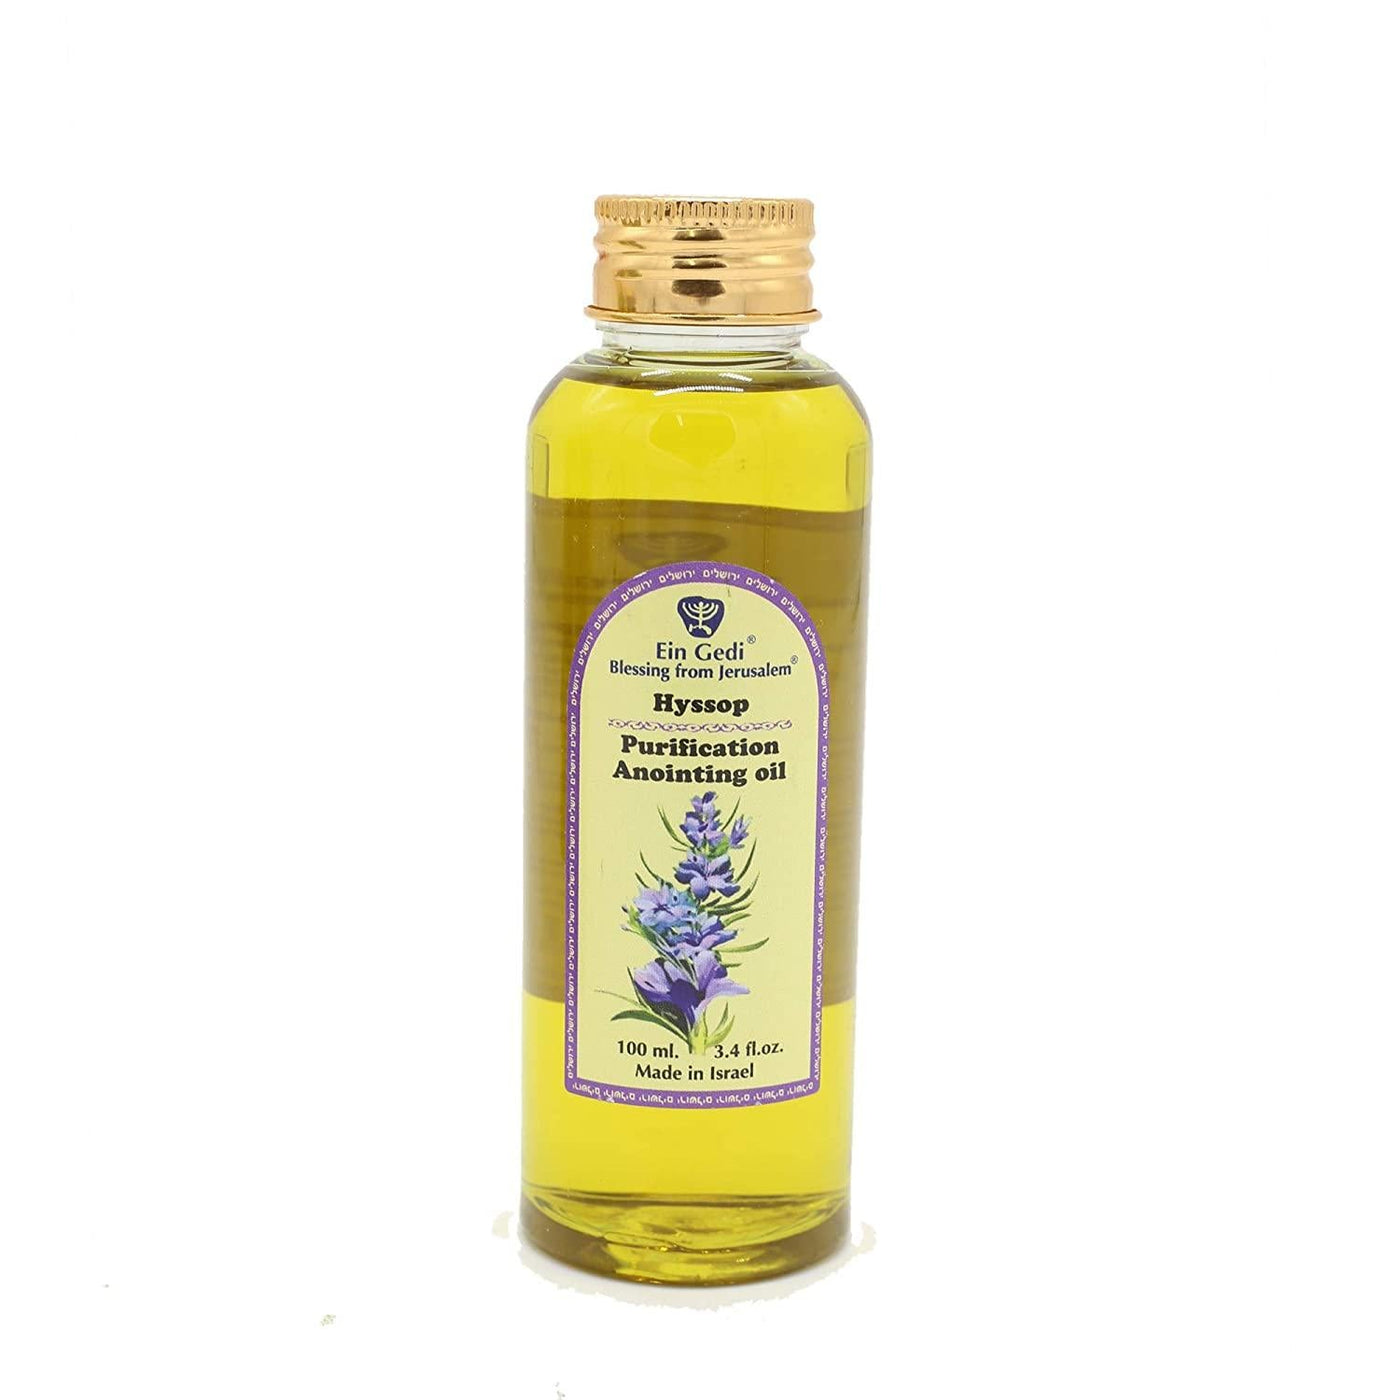 Hyssop Anointing Oil 100 ml From Holyland Jerusalem - Spring Nahal